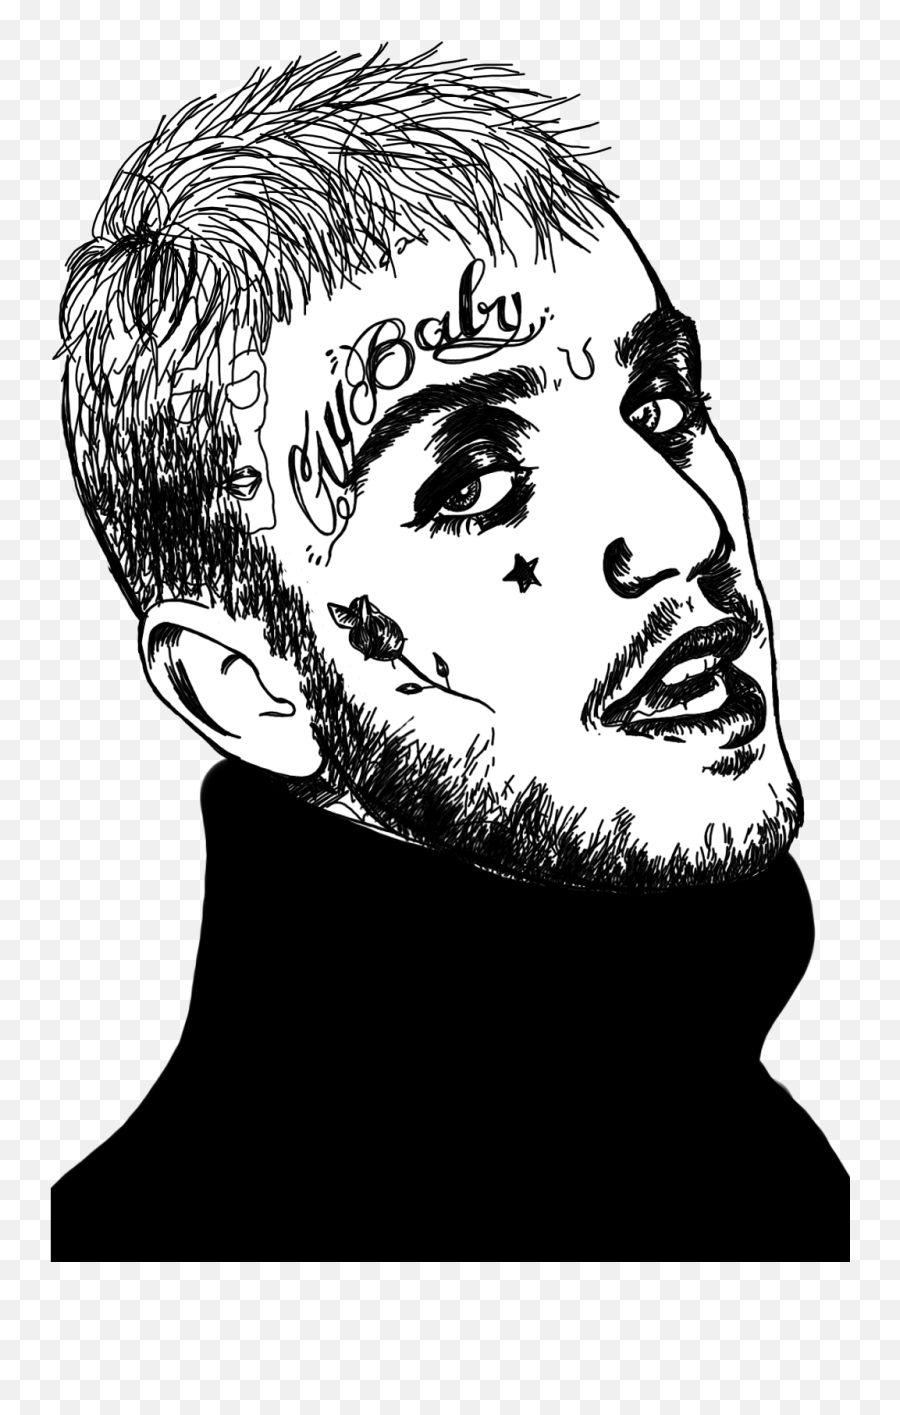 Crybaby - Cry Baby Lil Peep Png,Crybaby Png